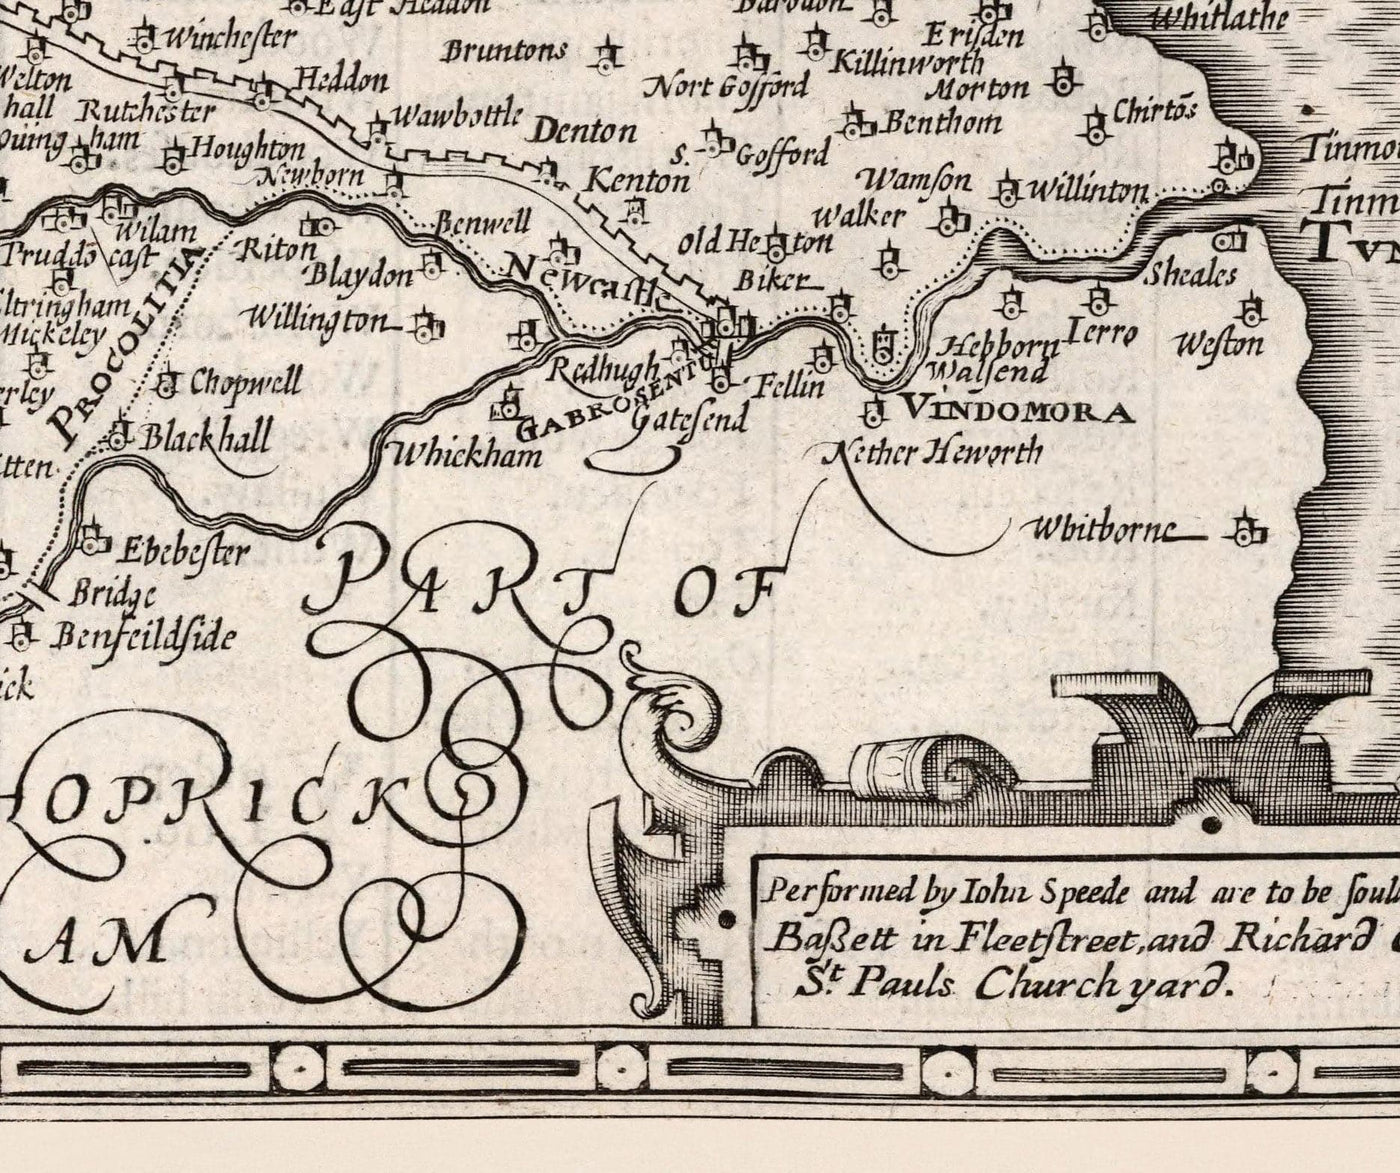 Old Map of Northumberland in 1611 - Newcastle, Gateshead, Hadrian's Wall, South Shields, Tyne and Wear